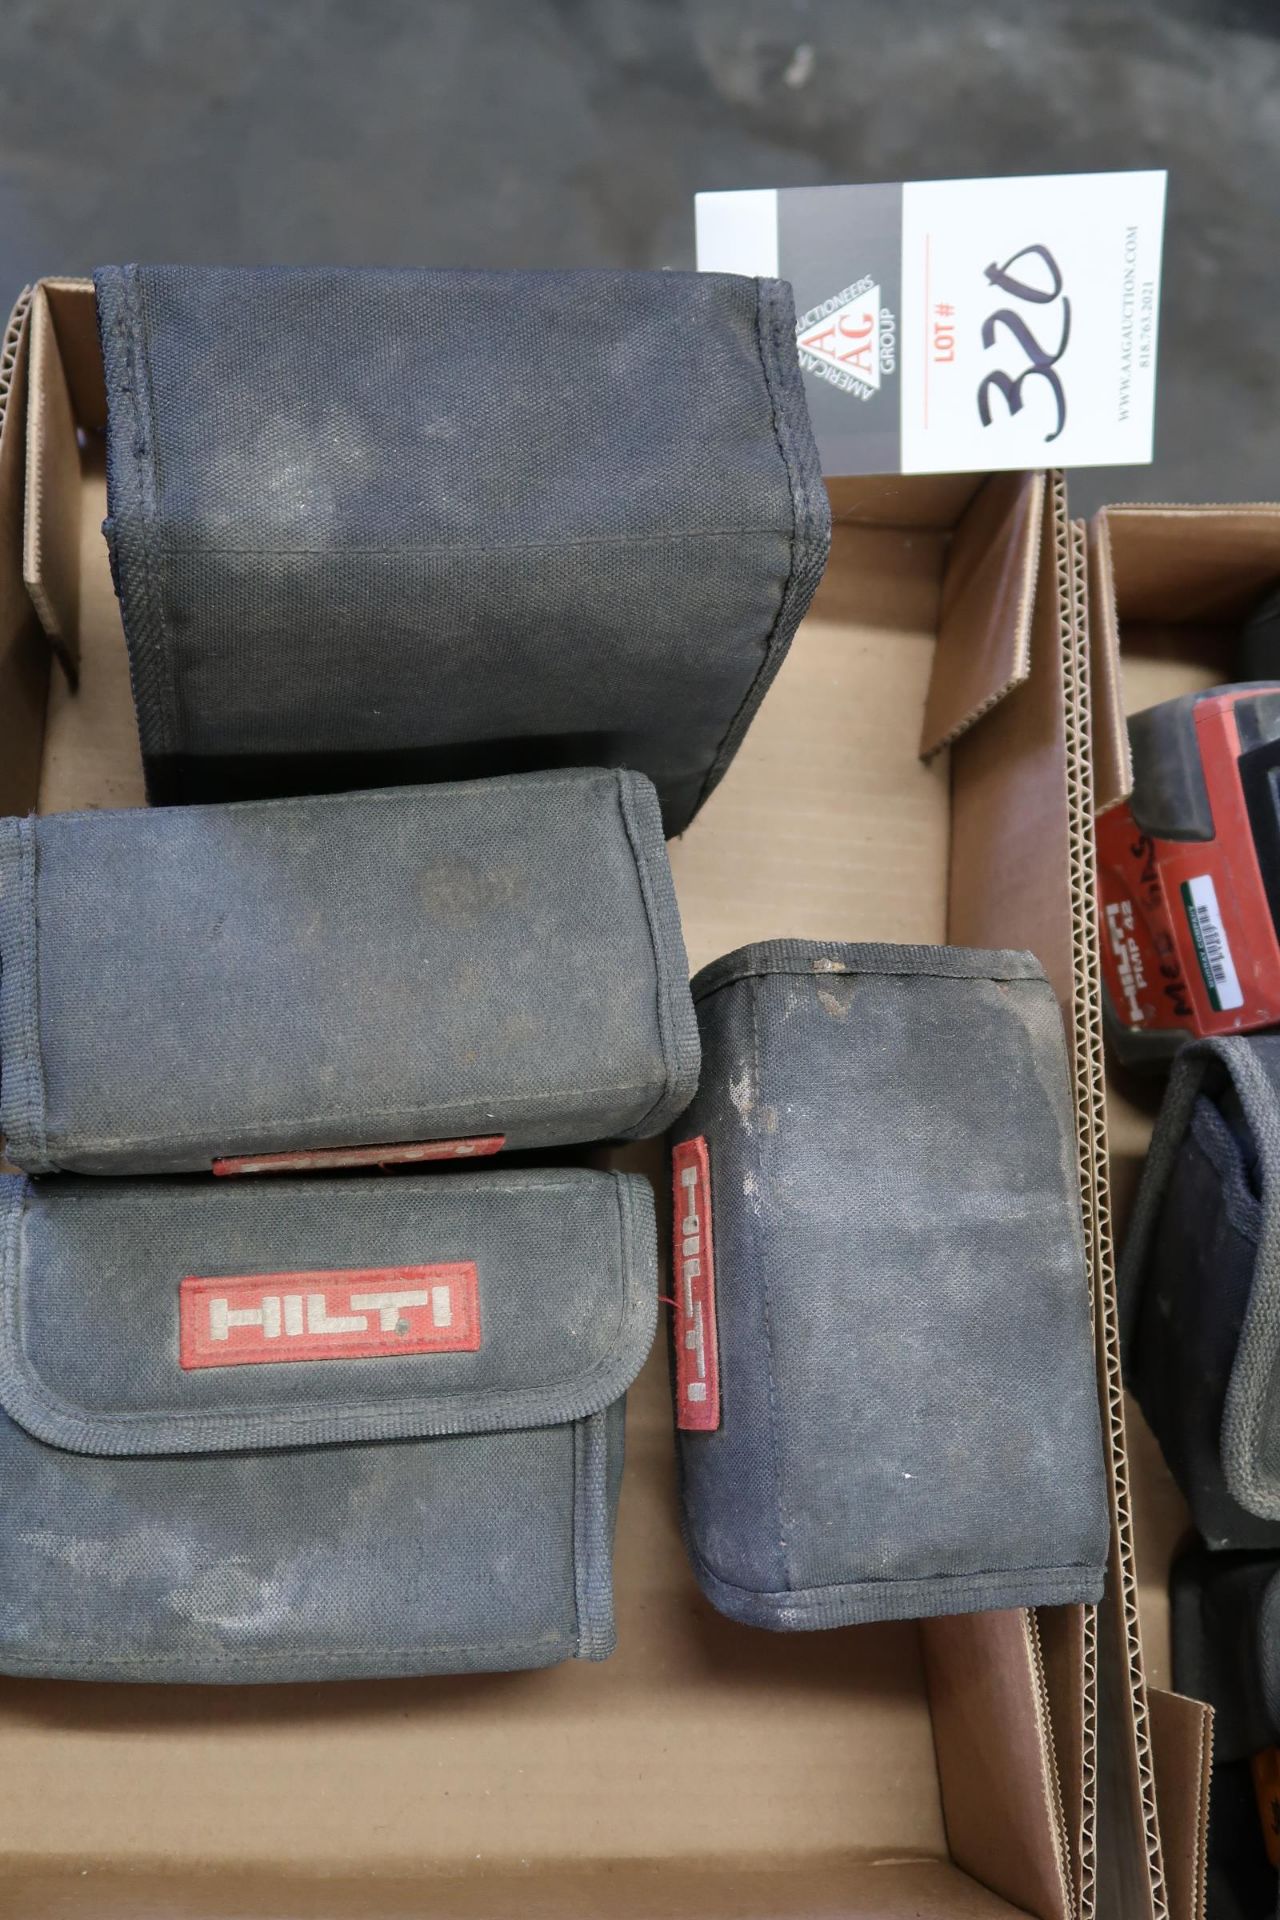 Hilti PM2-3 Laser Levels (4) (SOLD AS-IS - NO WARRANTY)